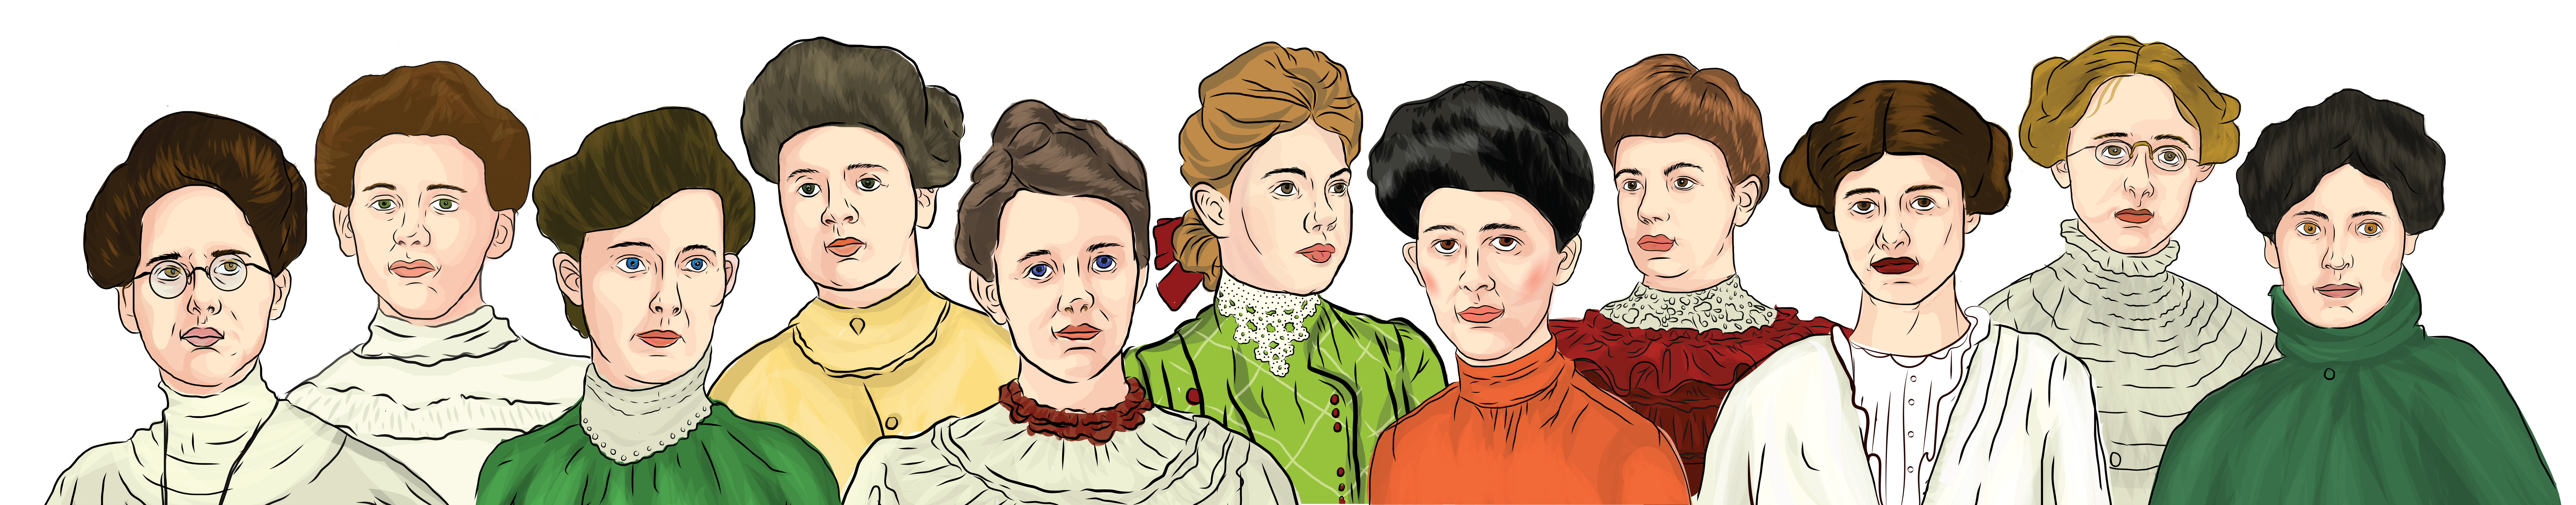 An illustration of Alpha Gamma Delta's 11 founders